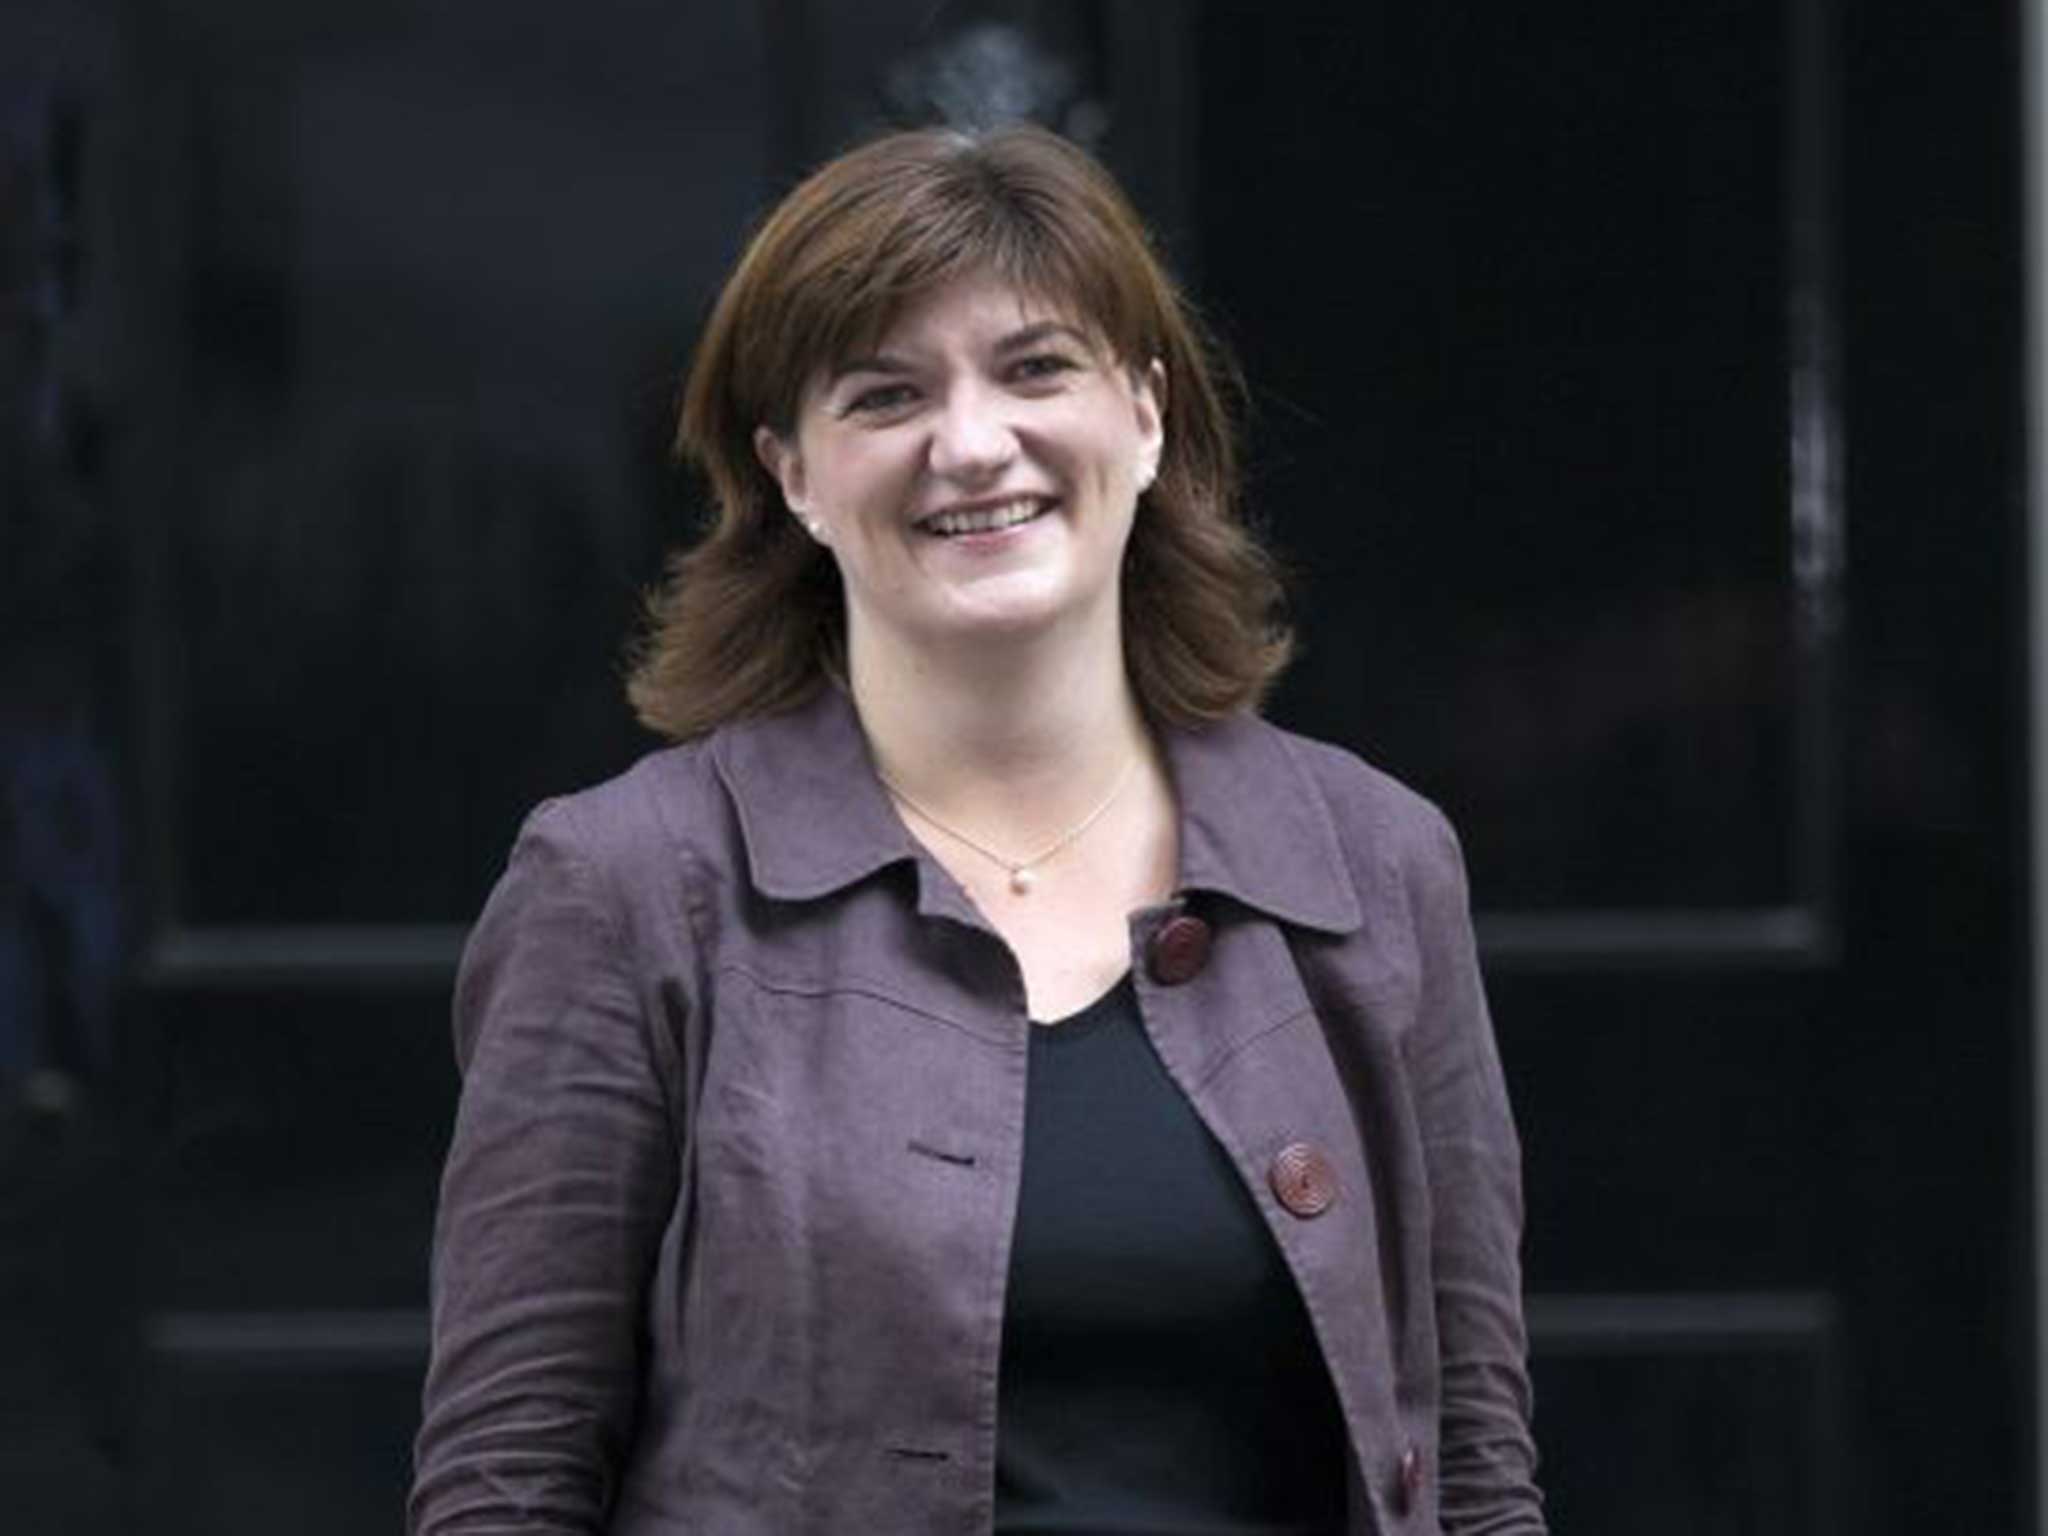 Nicky Morgan, the Education Secretary, strongly denied the report